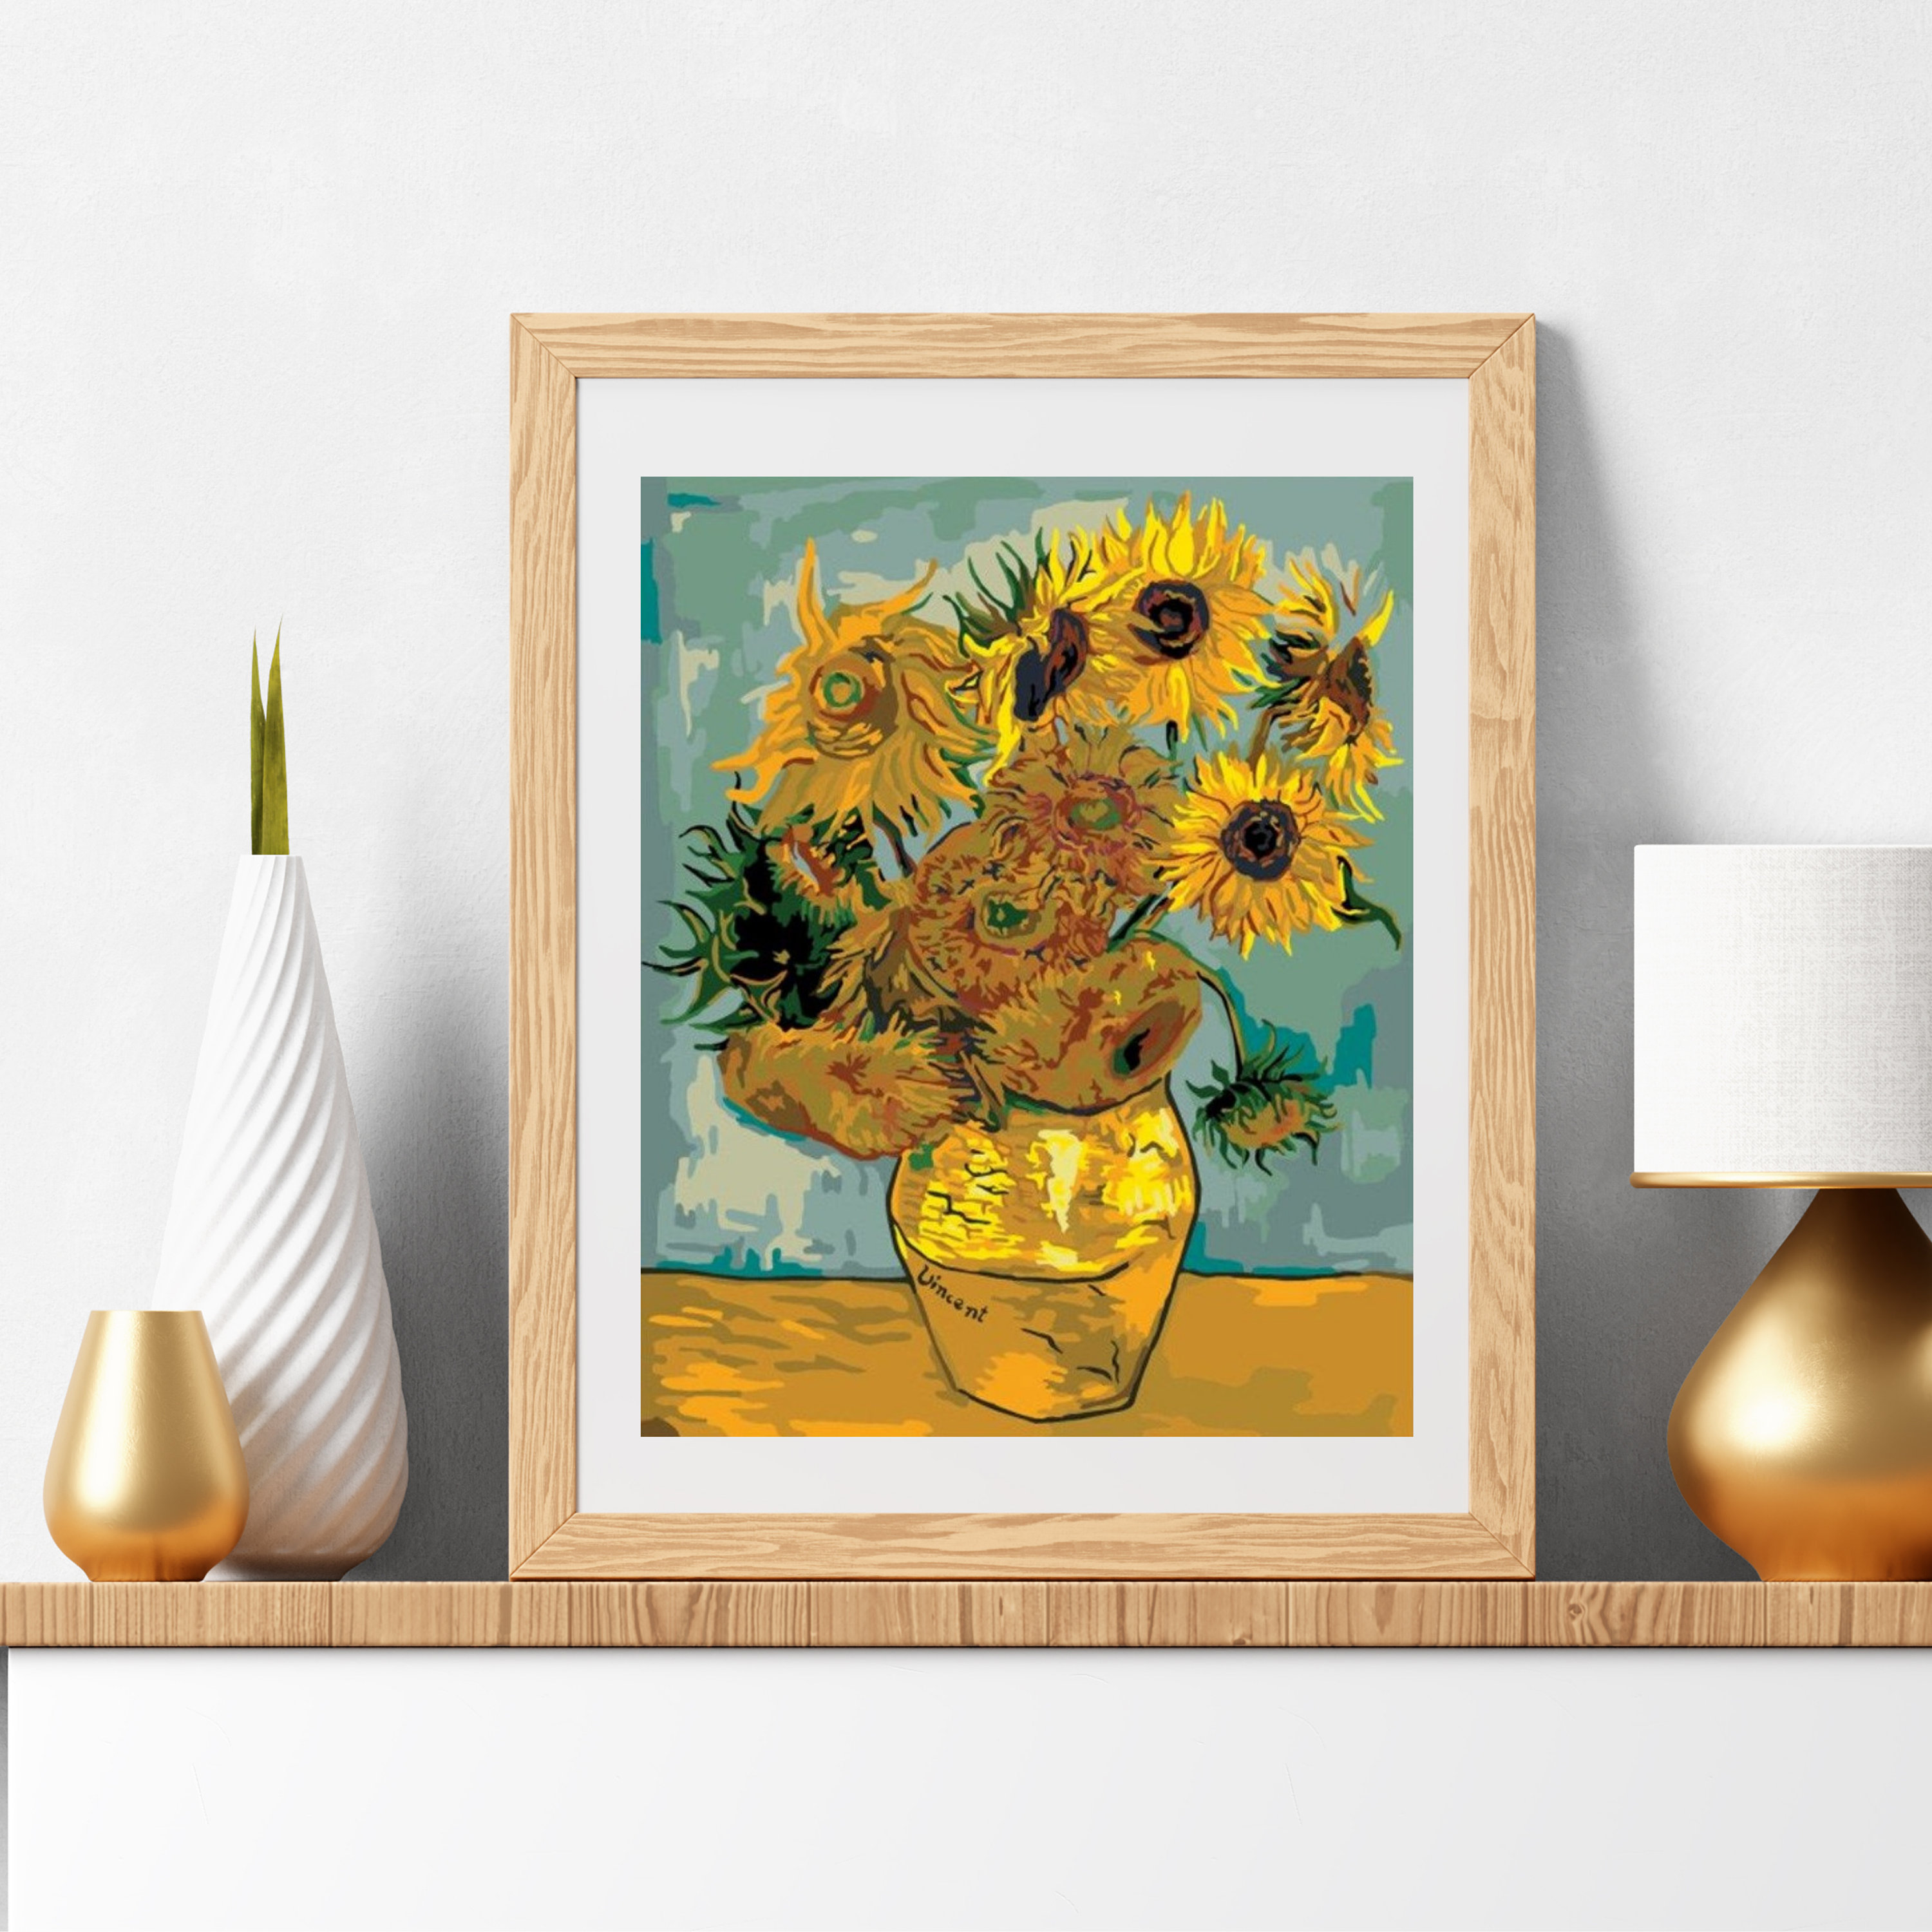 VIKMARI Paint by Number for Adults Painting by Numbers Kits Van Gogh Sunflower DIY Acrylic Painting by Numbers Van Gogh for Wall Decor 40 x 50 cm